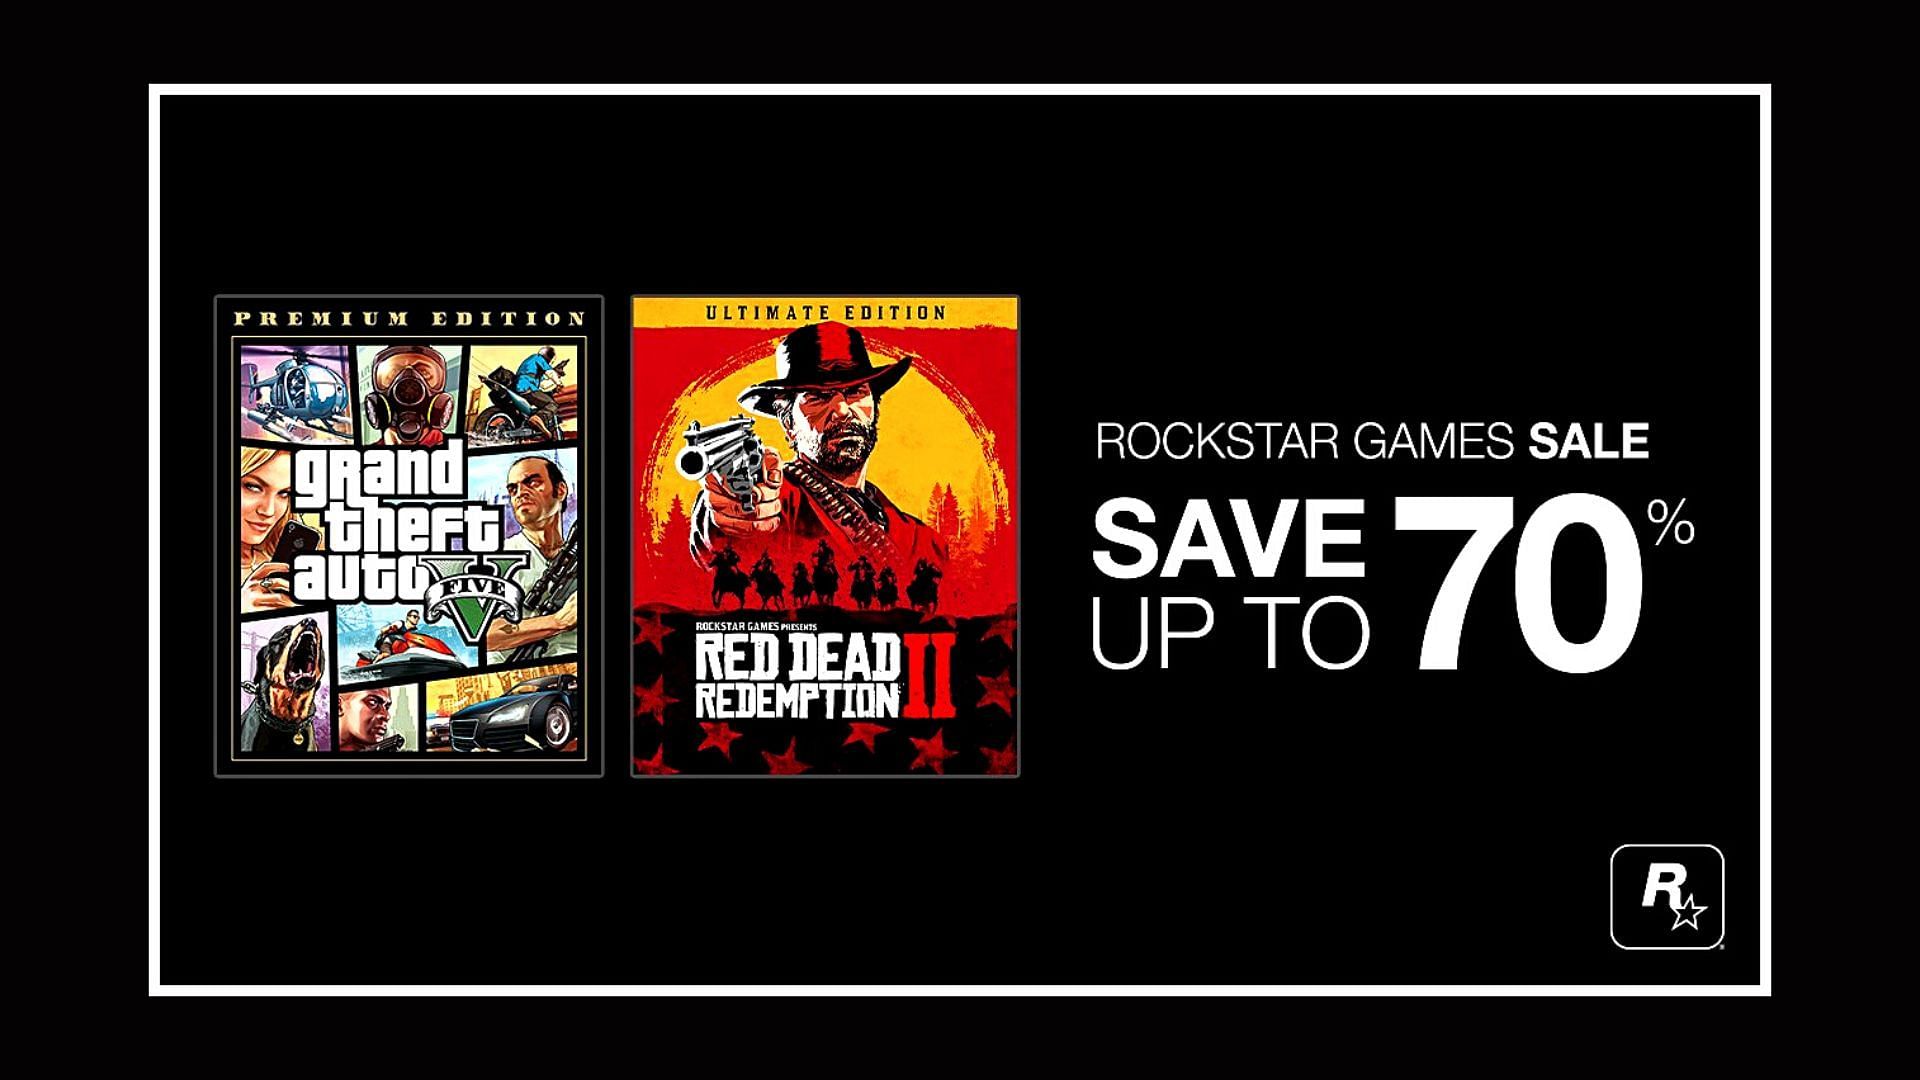 An official banner of the new Rockstar Games Sale on Epic Games Store featuring GTA 5 (Image via Rockstar Games)